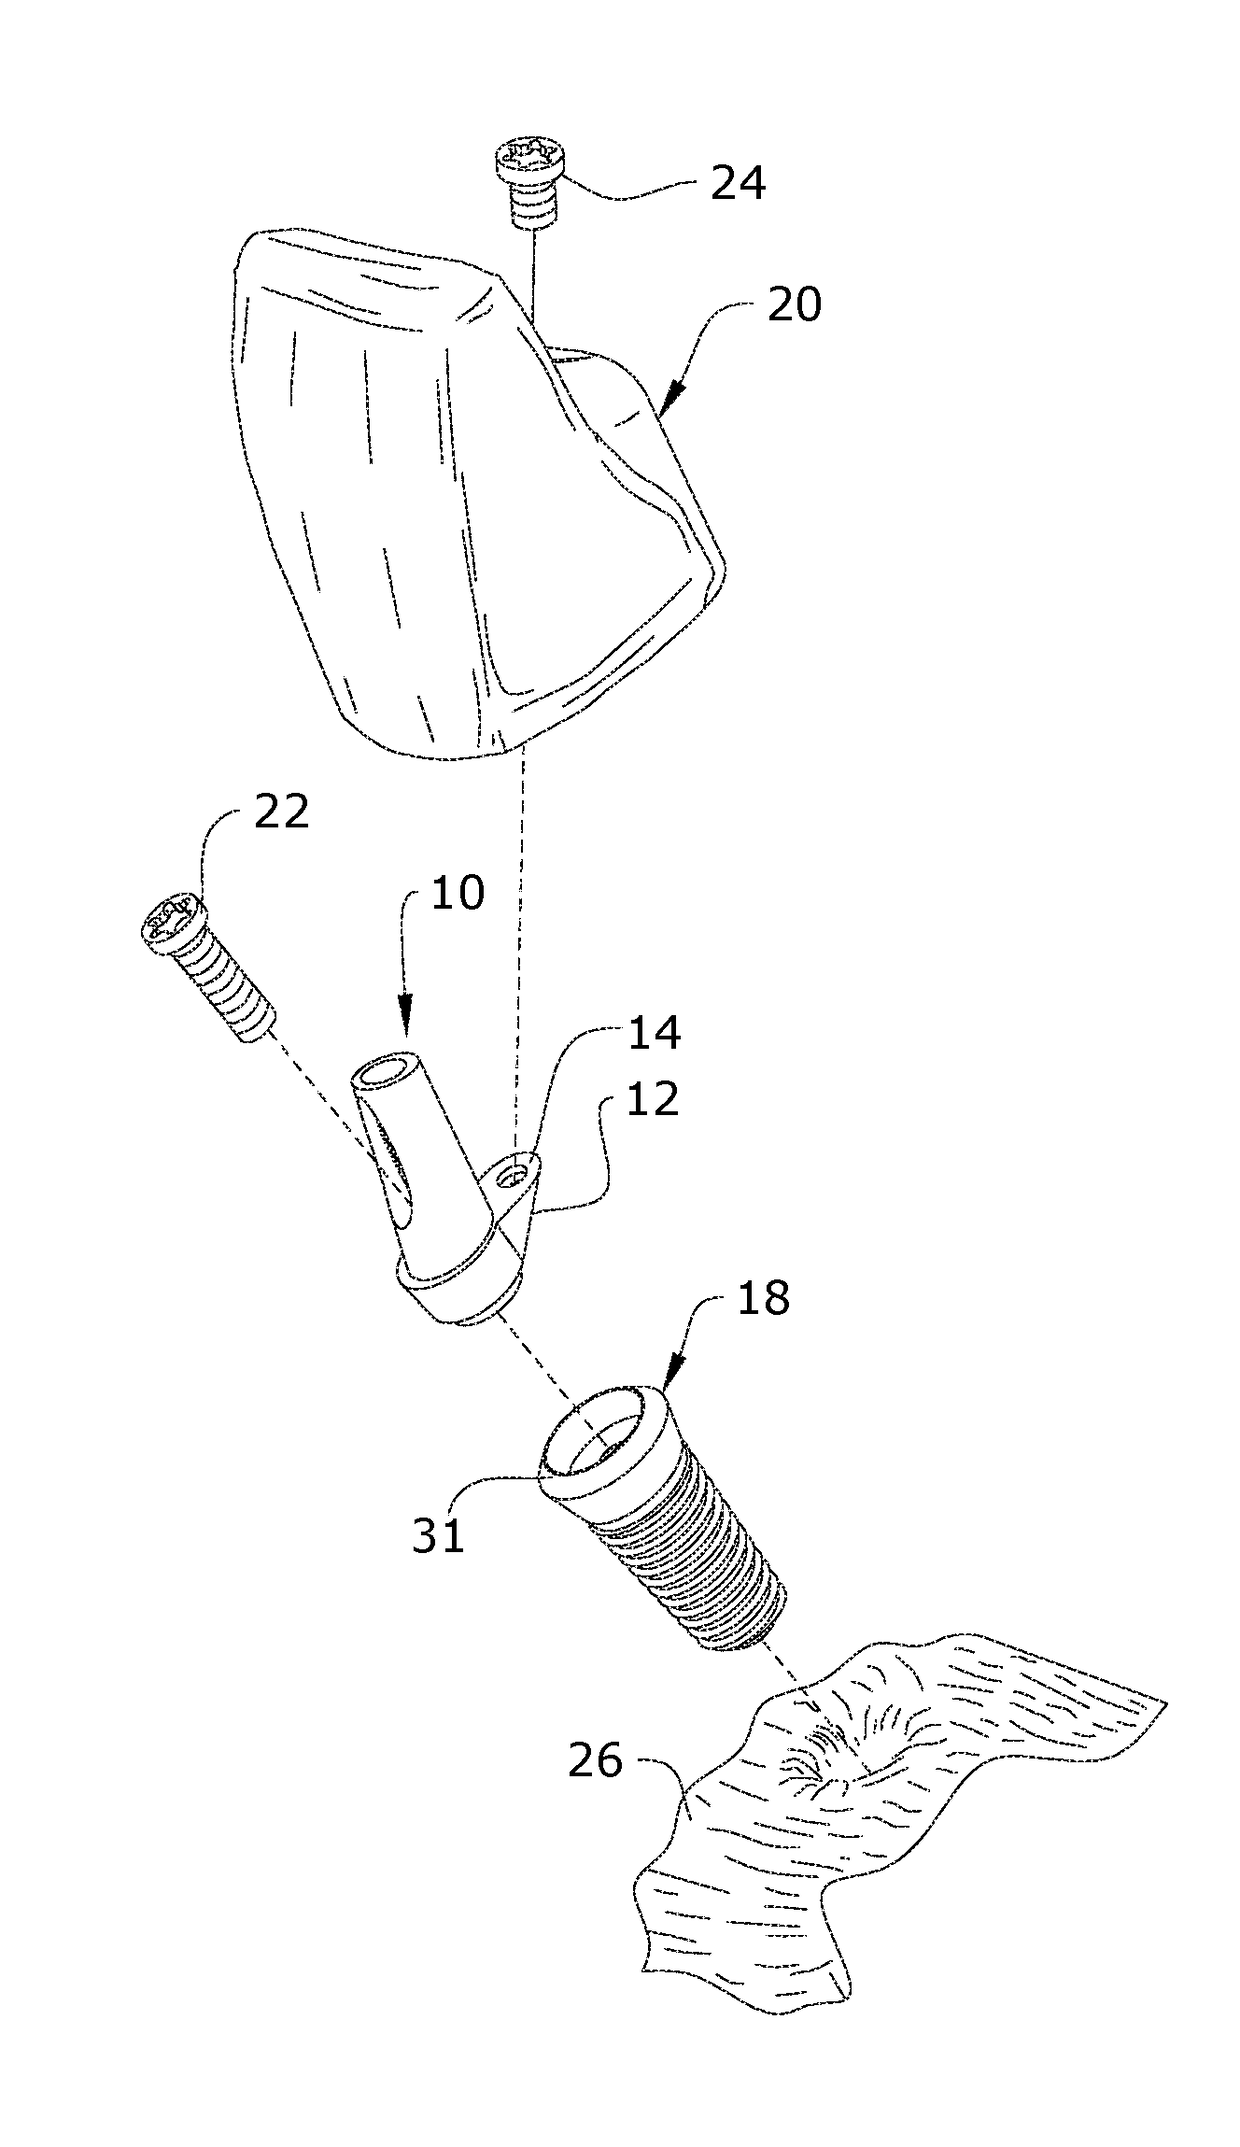 System, method and apparatus for cementless retention of dental crowns to implants